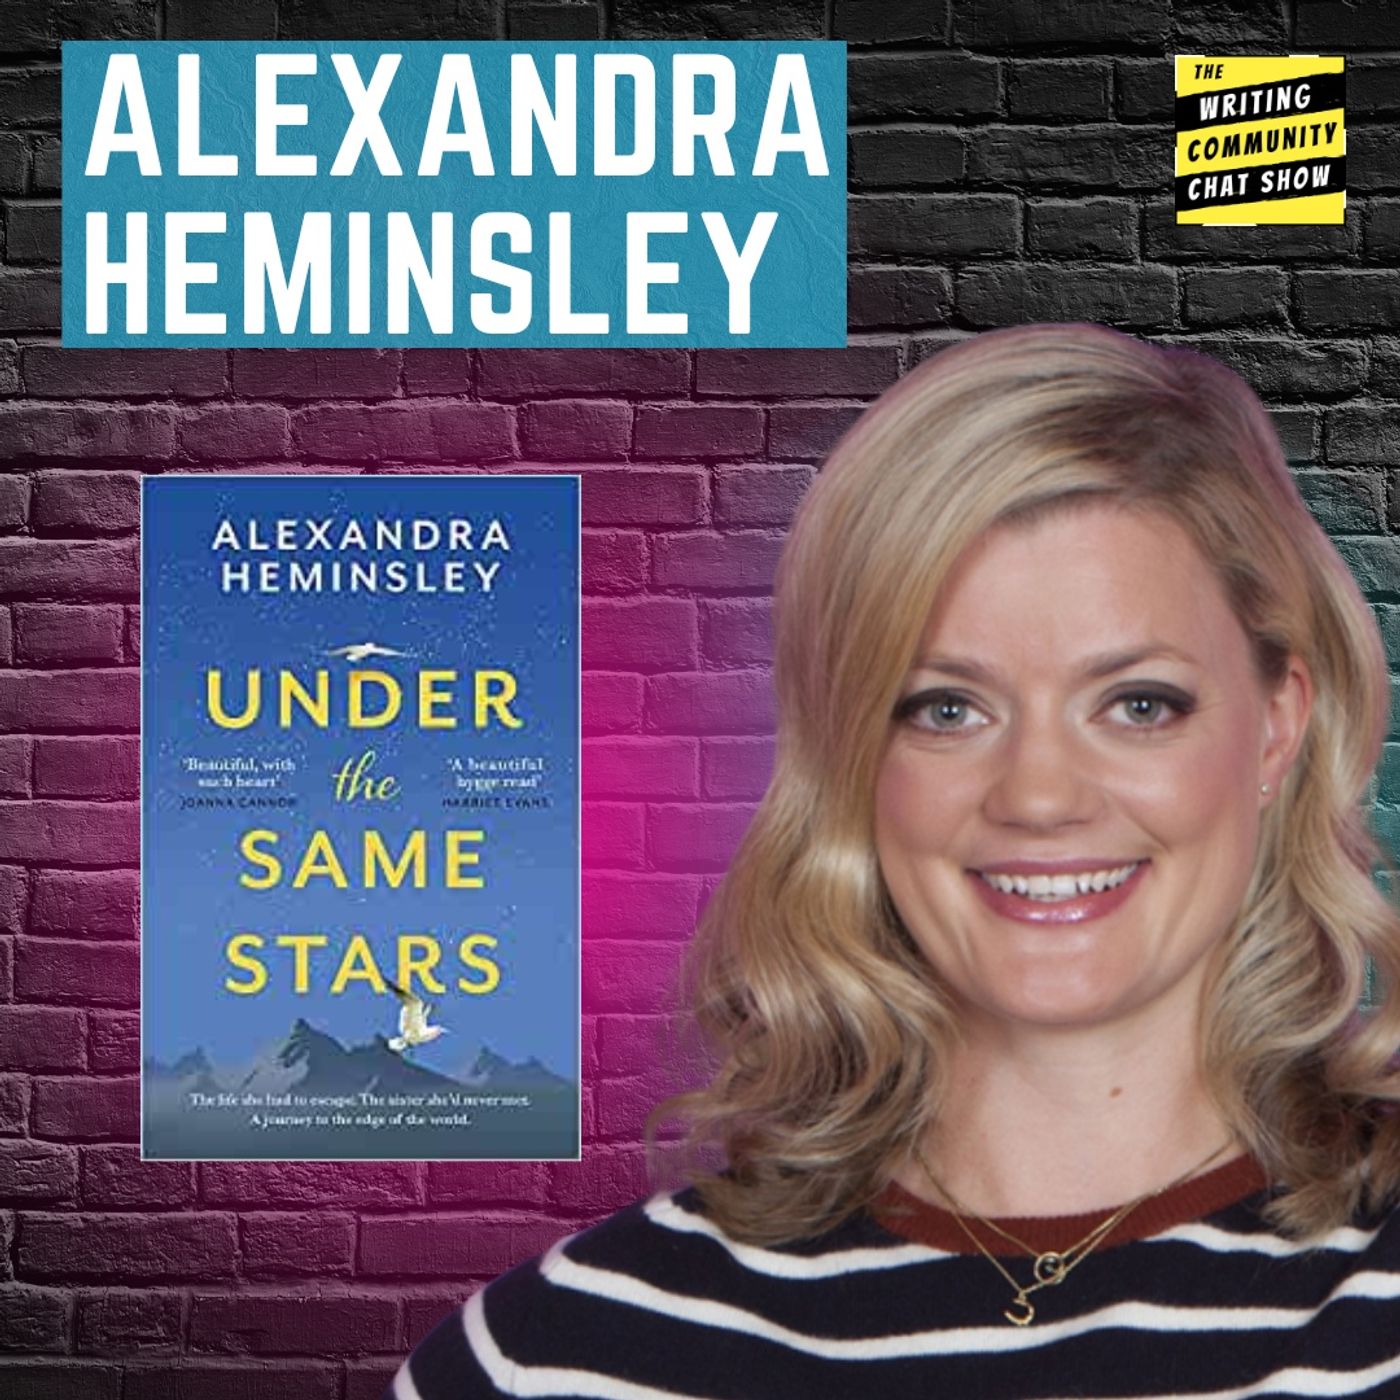 In conversation with Sunday Times bestselling author Alexandra Heminsley.